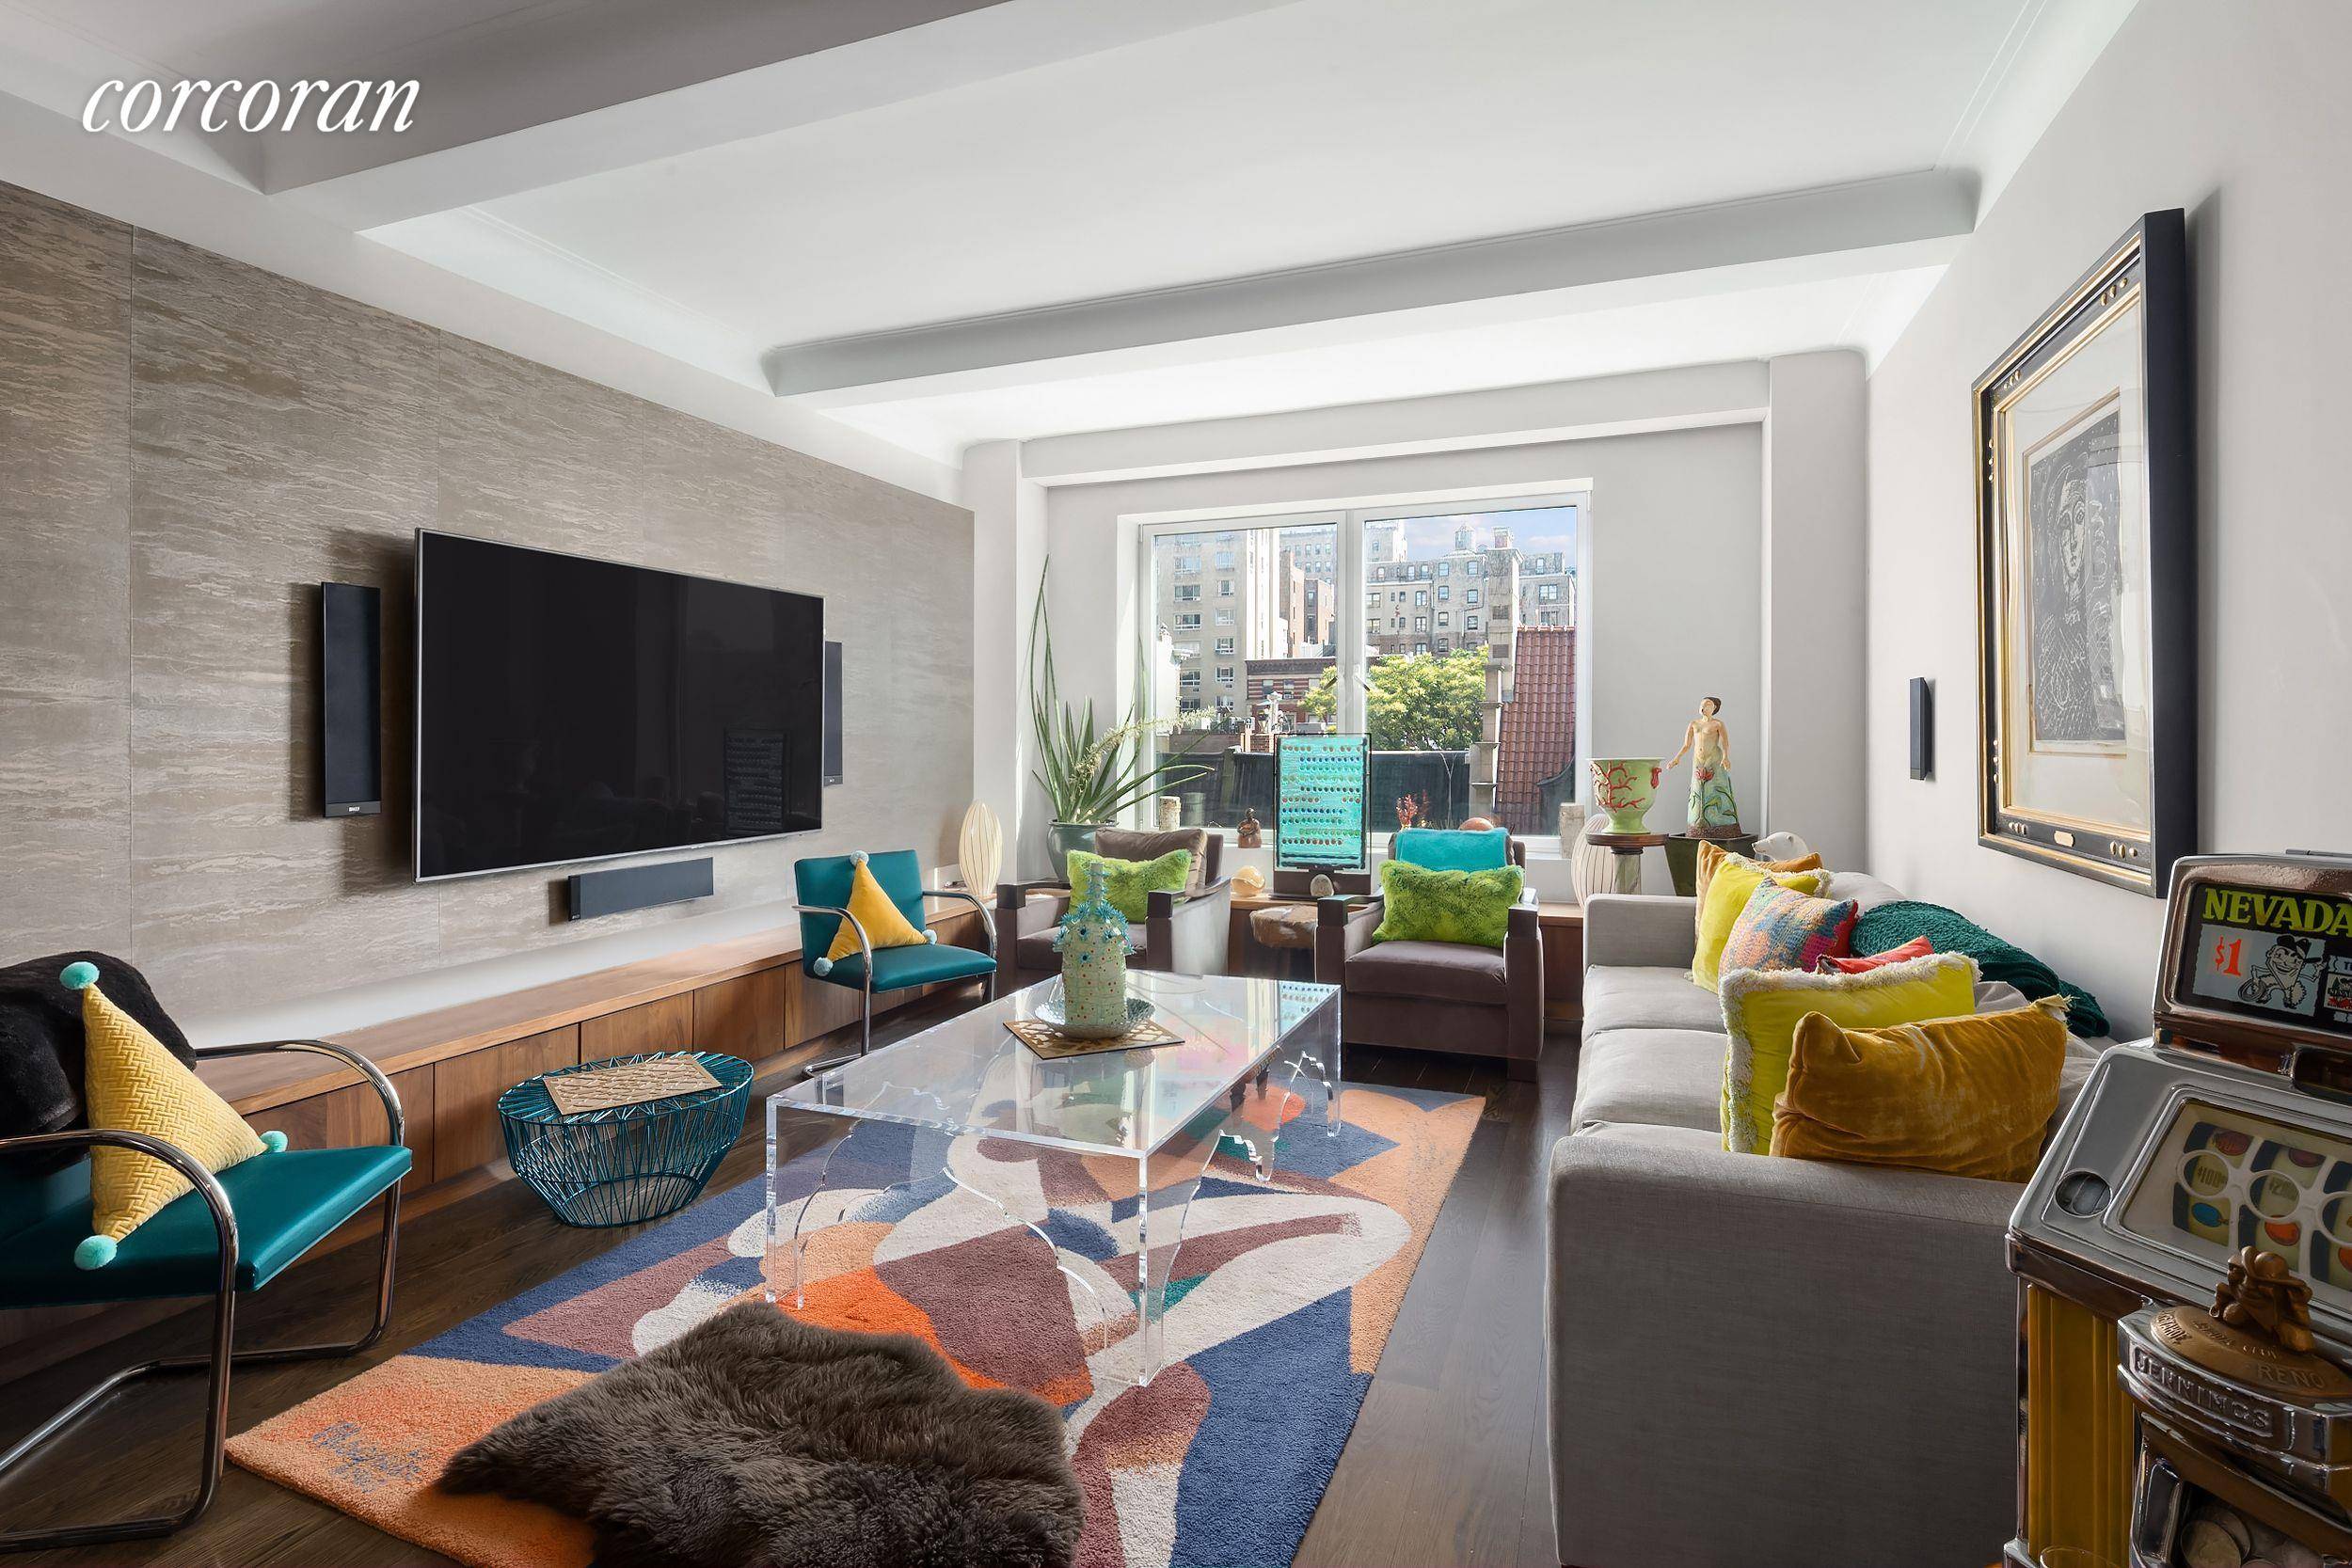 Located at 90 Riverside Drive, one of the most coveted full service buildings on the Upper West Side, this meticulously renovated classic six residence offers exquisitely designed spaces for the ...